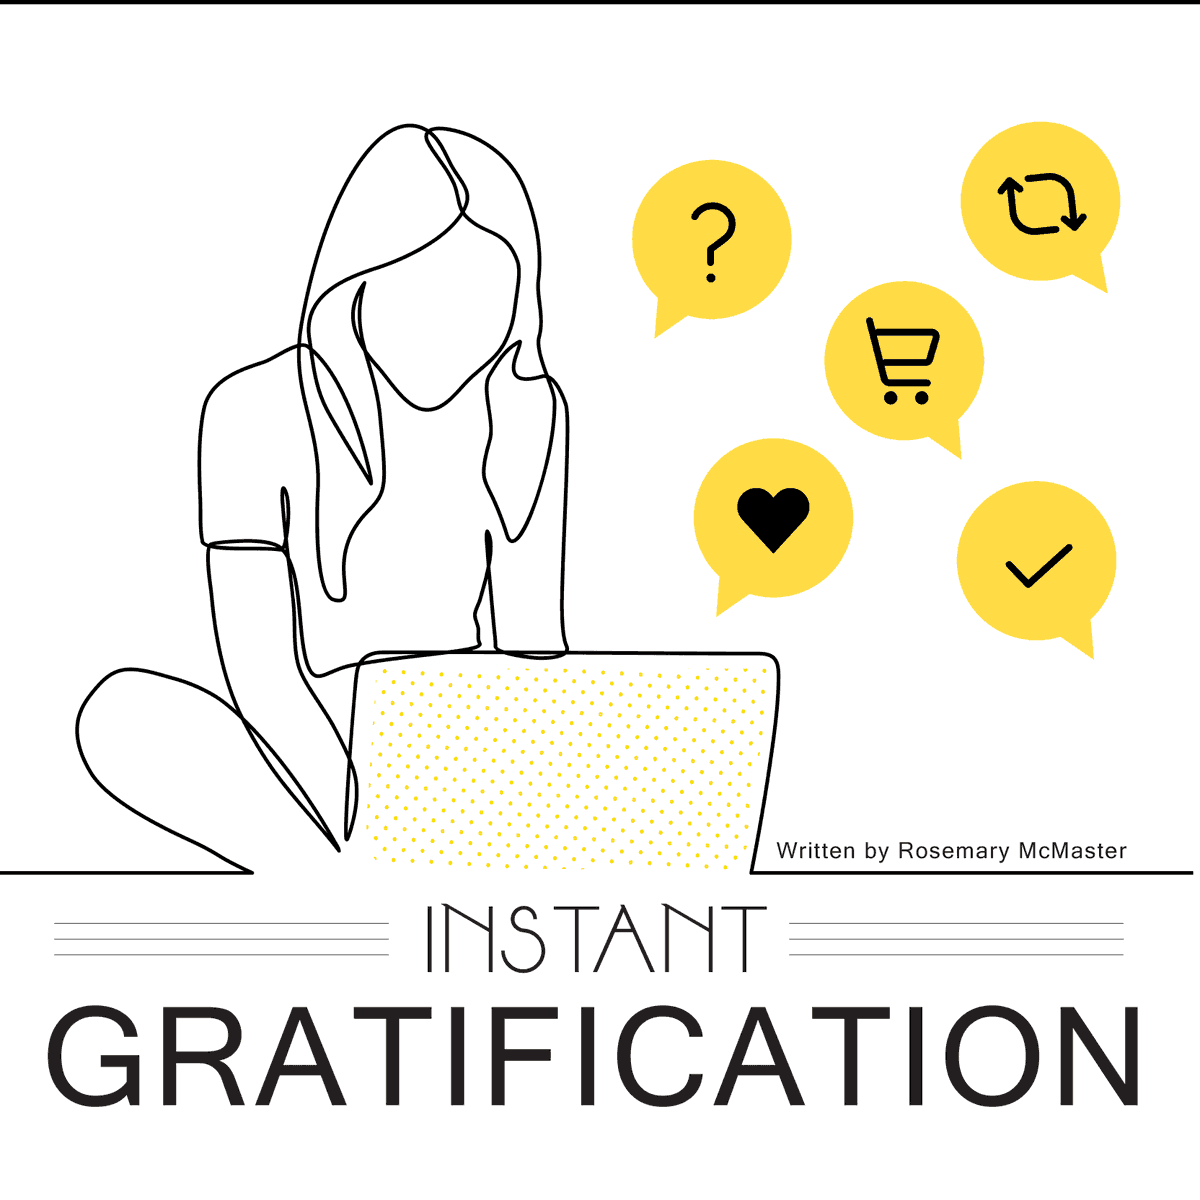 #LifeTips:
#Sacrifice all the sources of #instantgratification.